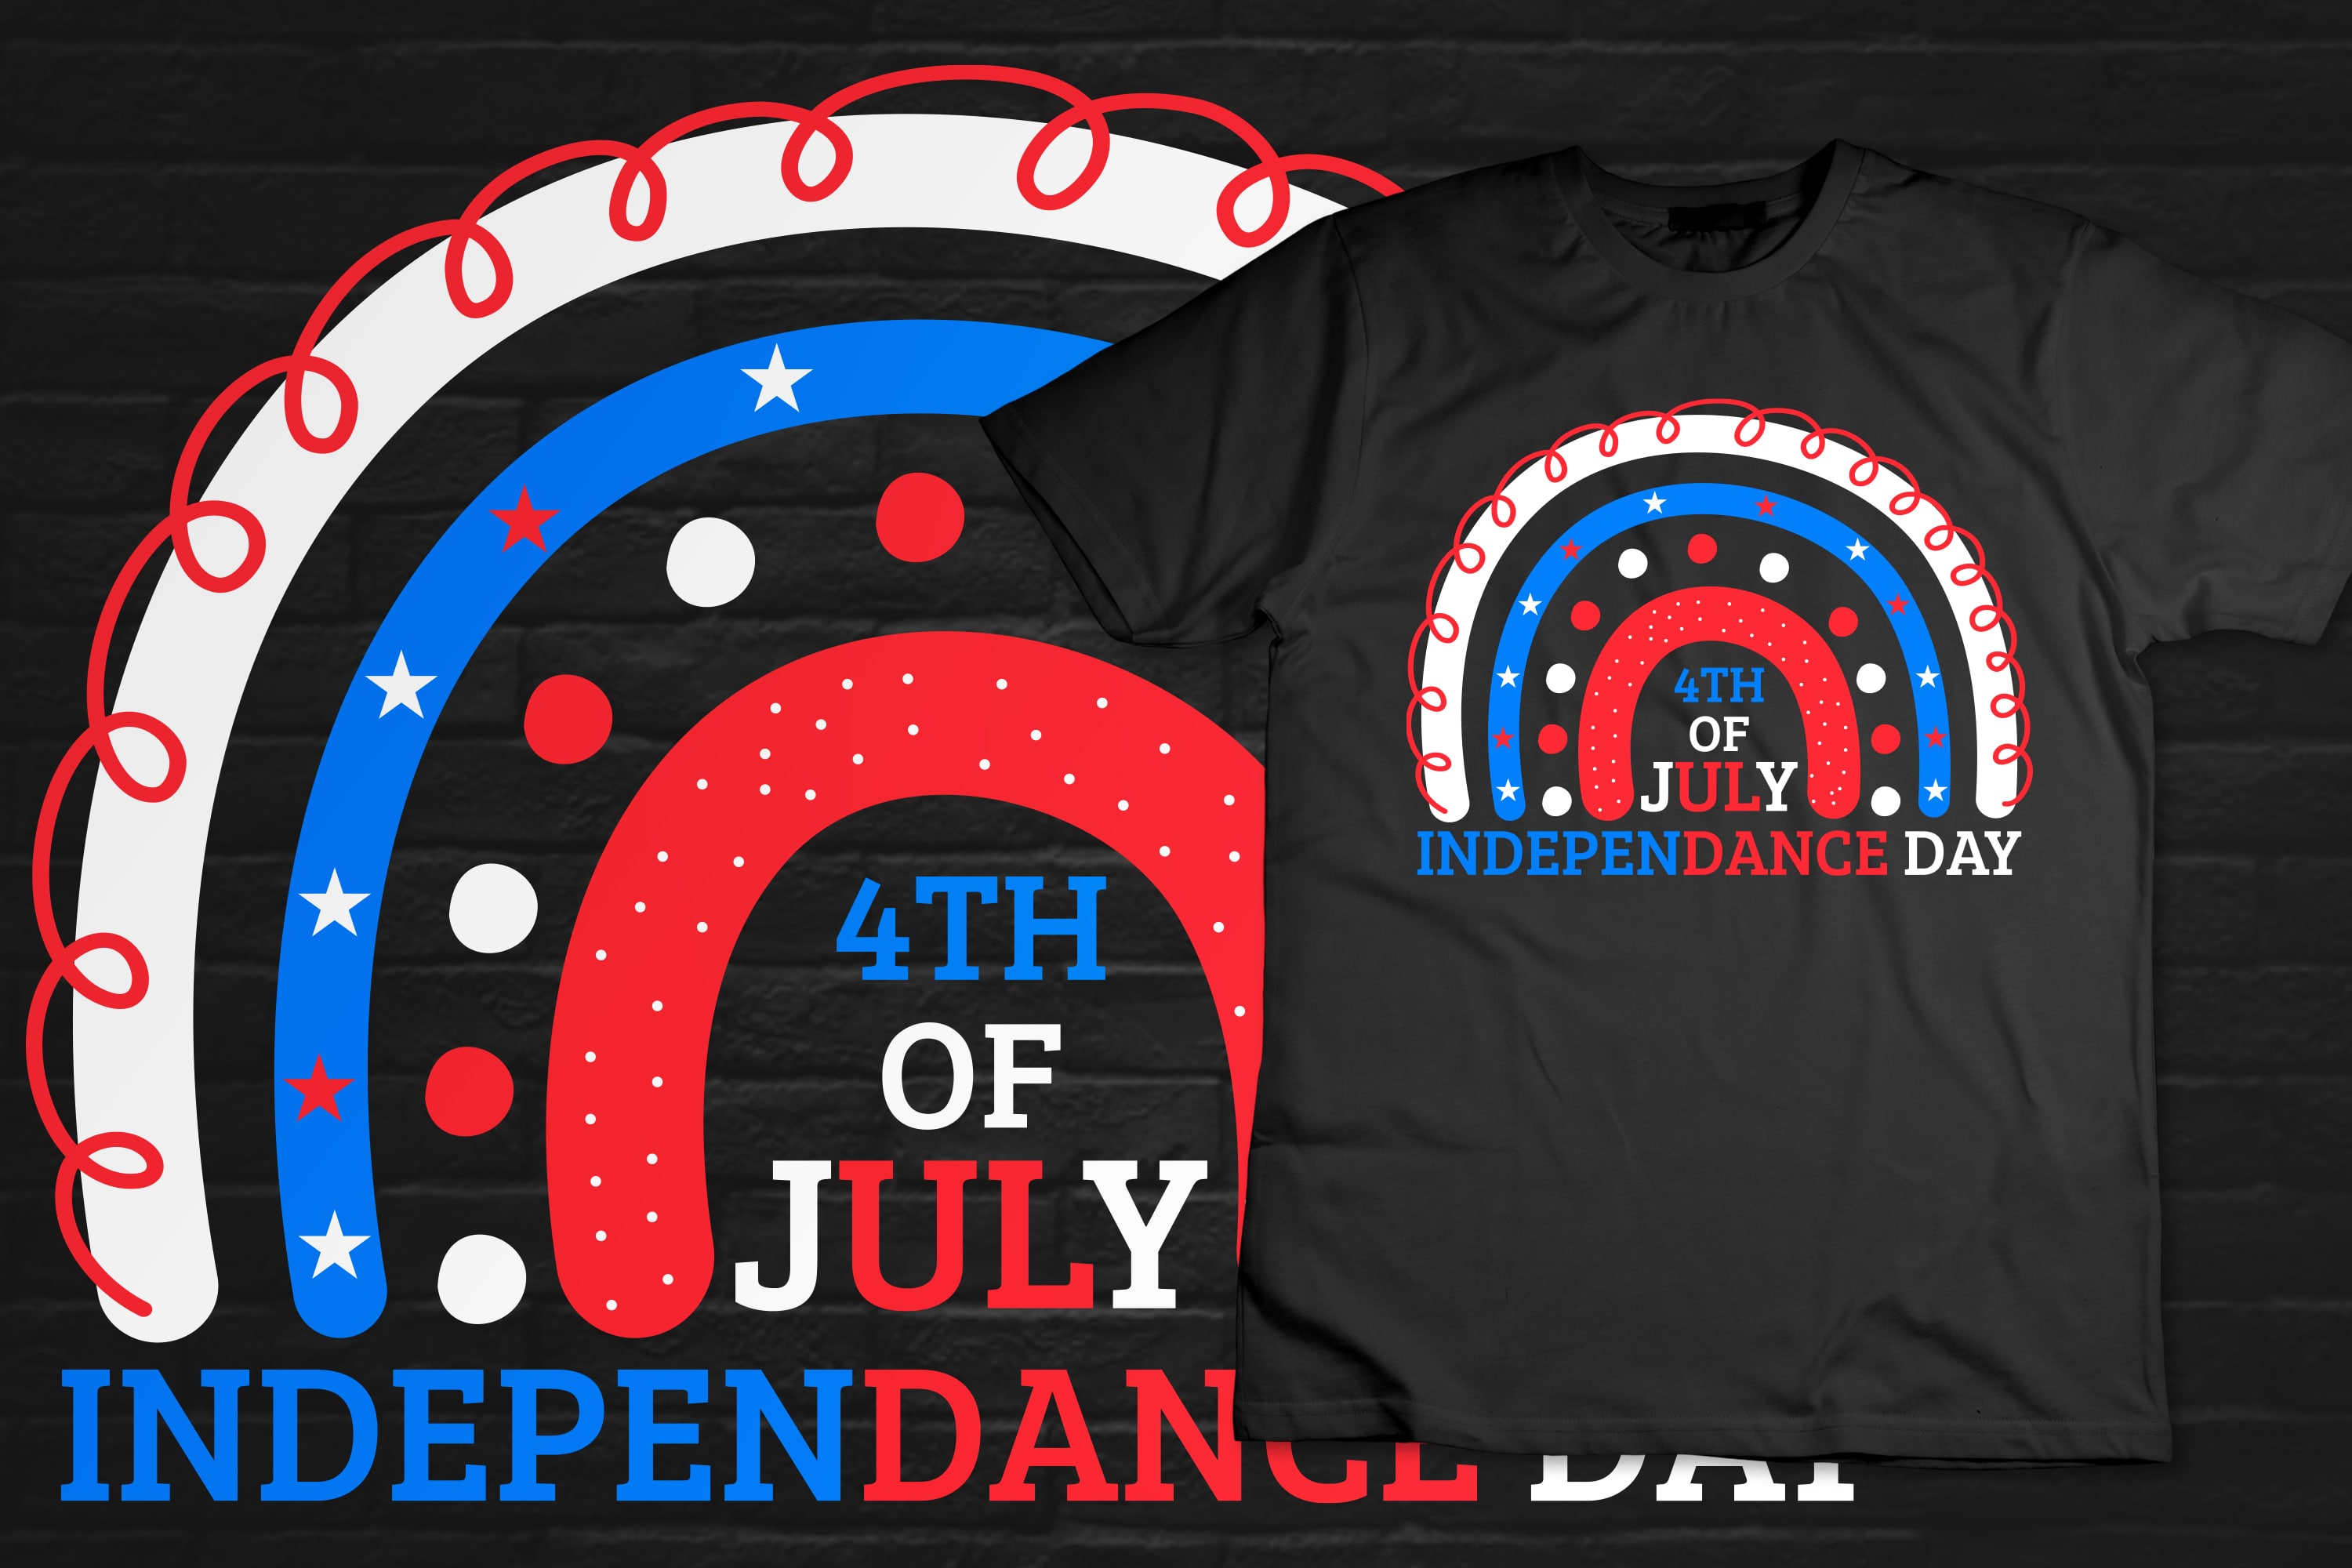 Fourth of july t - shirt and a fourth of july t - shirt.